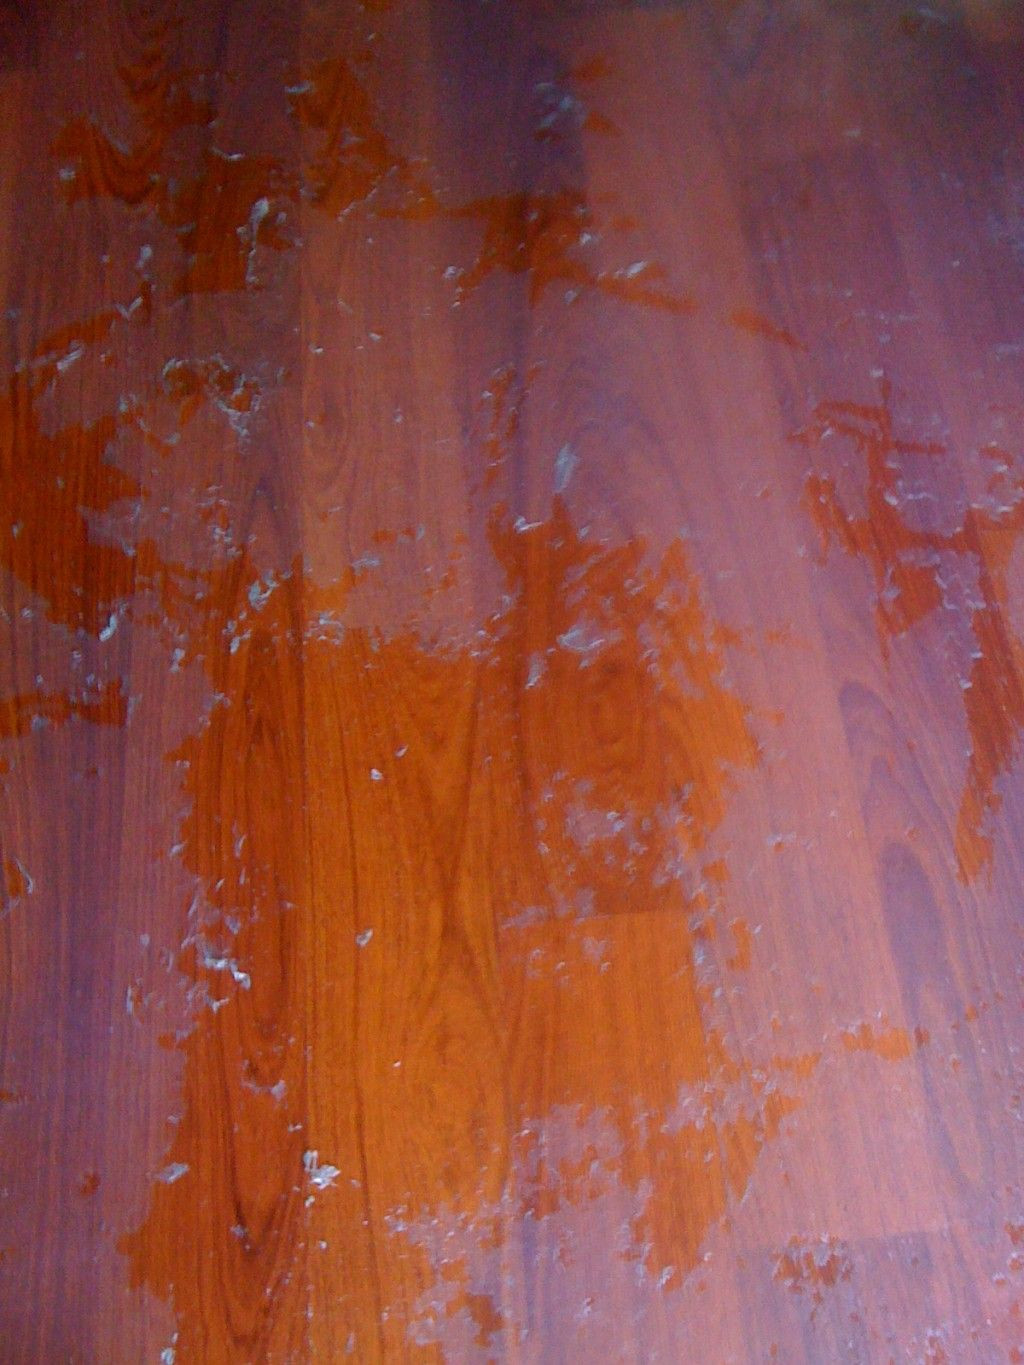 13 Elegant How to Make Hardwood Floors Shine 2024 free download how to make hardwood floors shine of how to remove wax and oil soap cleaners from wood floors recipes regarding how to remove oily or wax build up from cleaning or polishing solutions from w